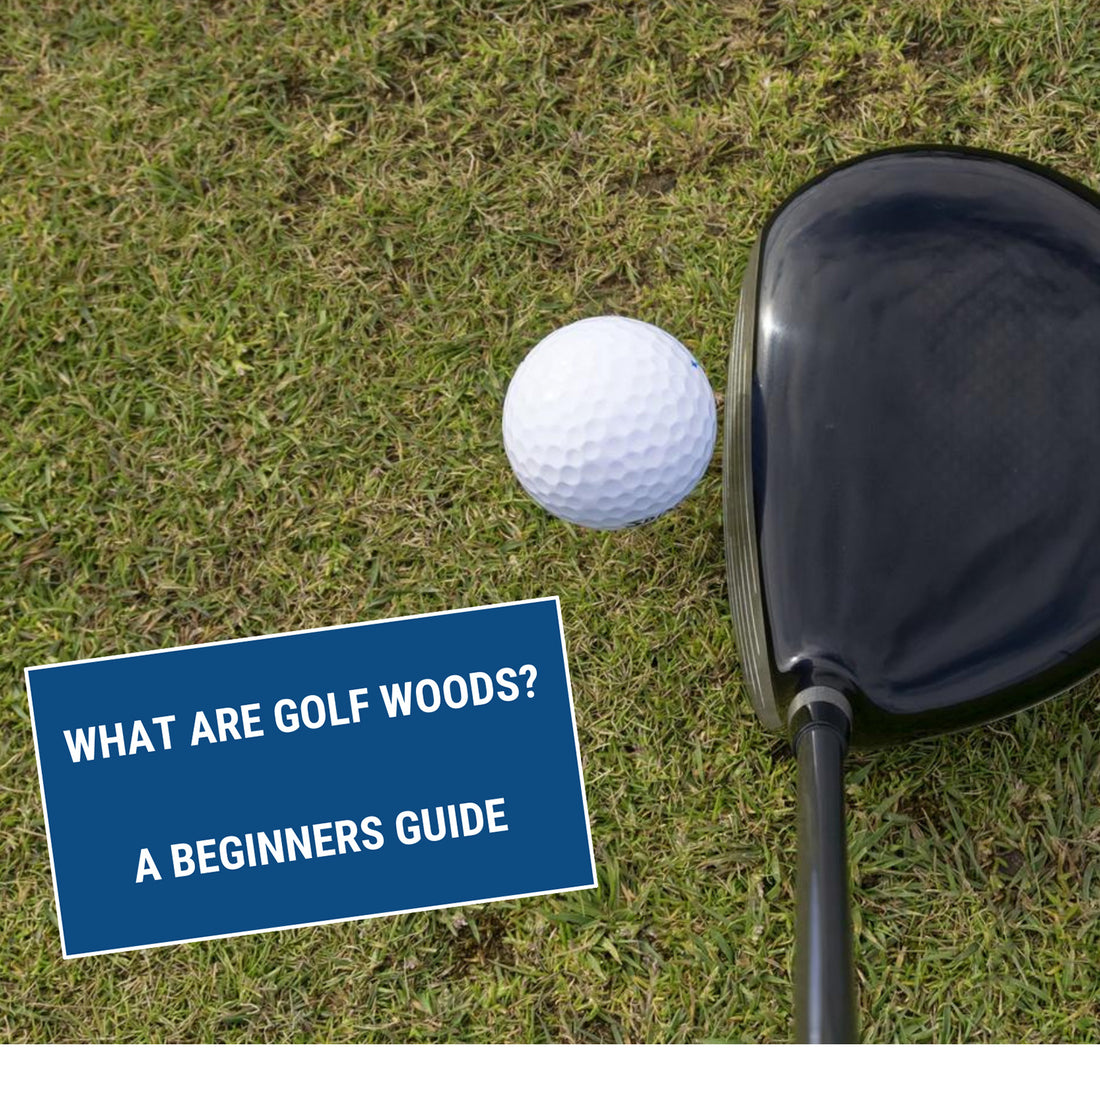 What Are Golf Woods? A Beginner's Guide